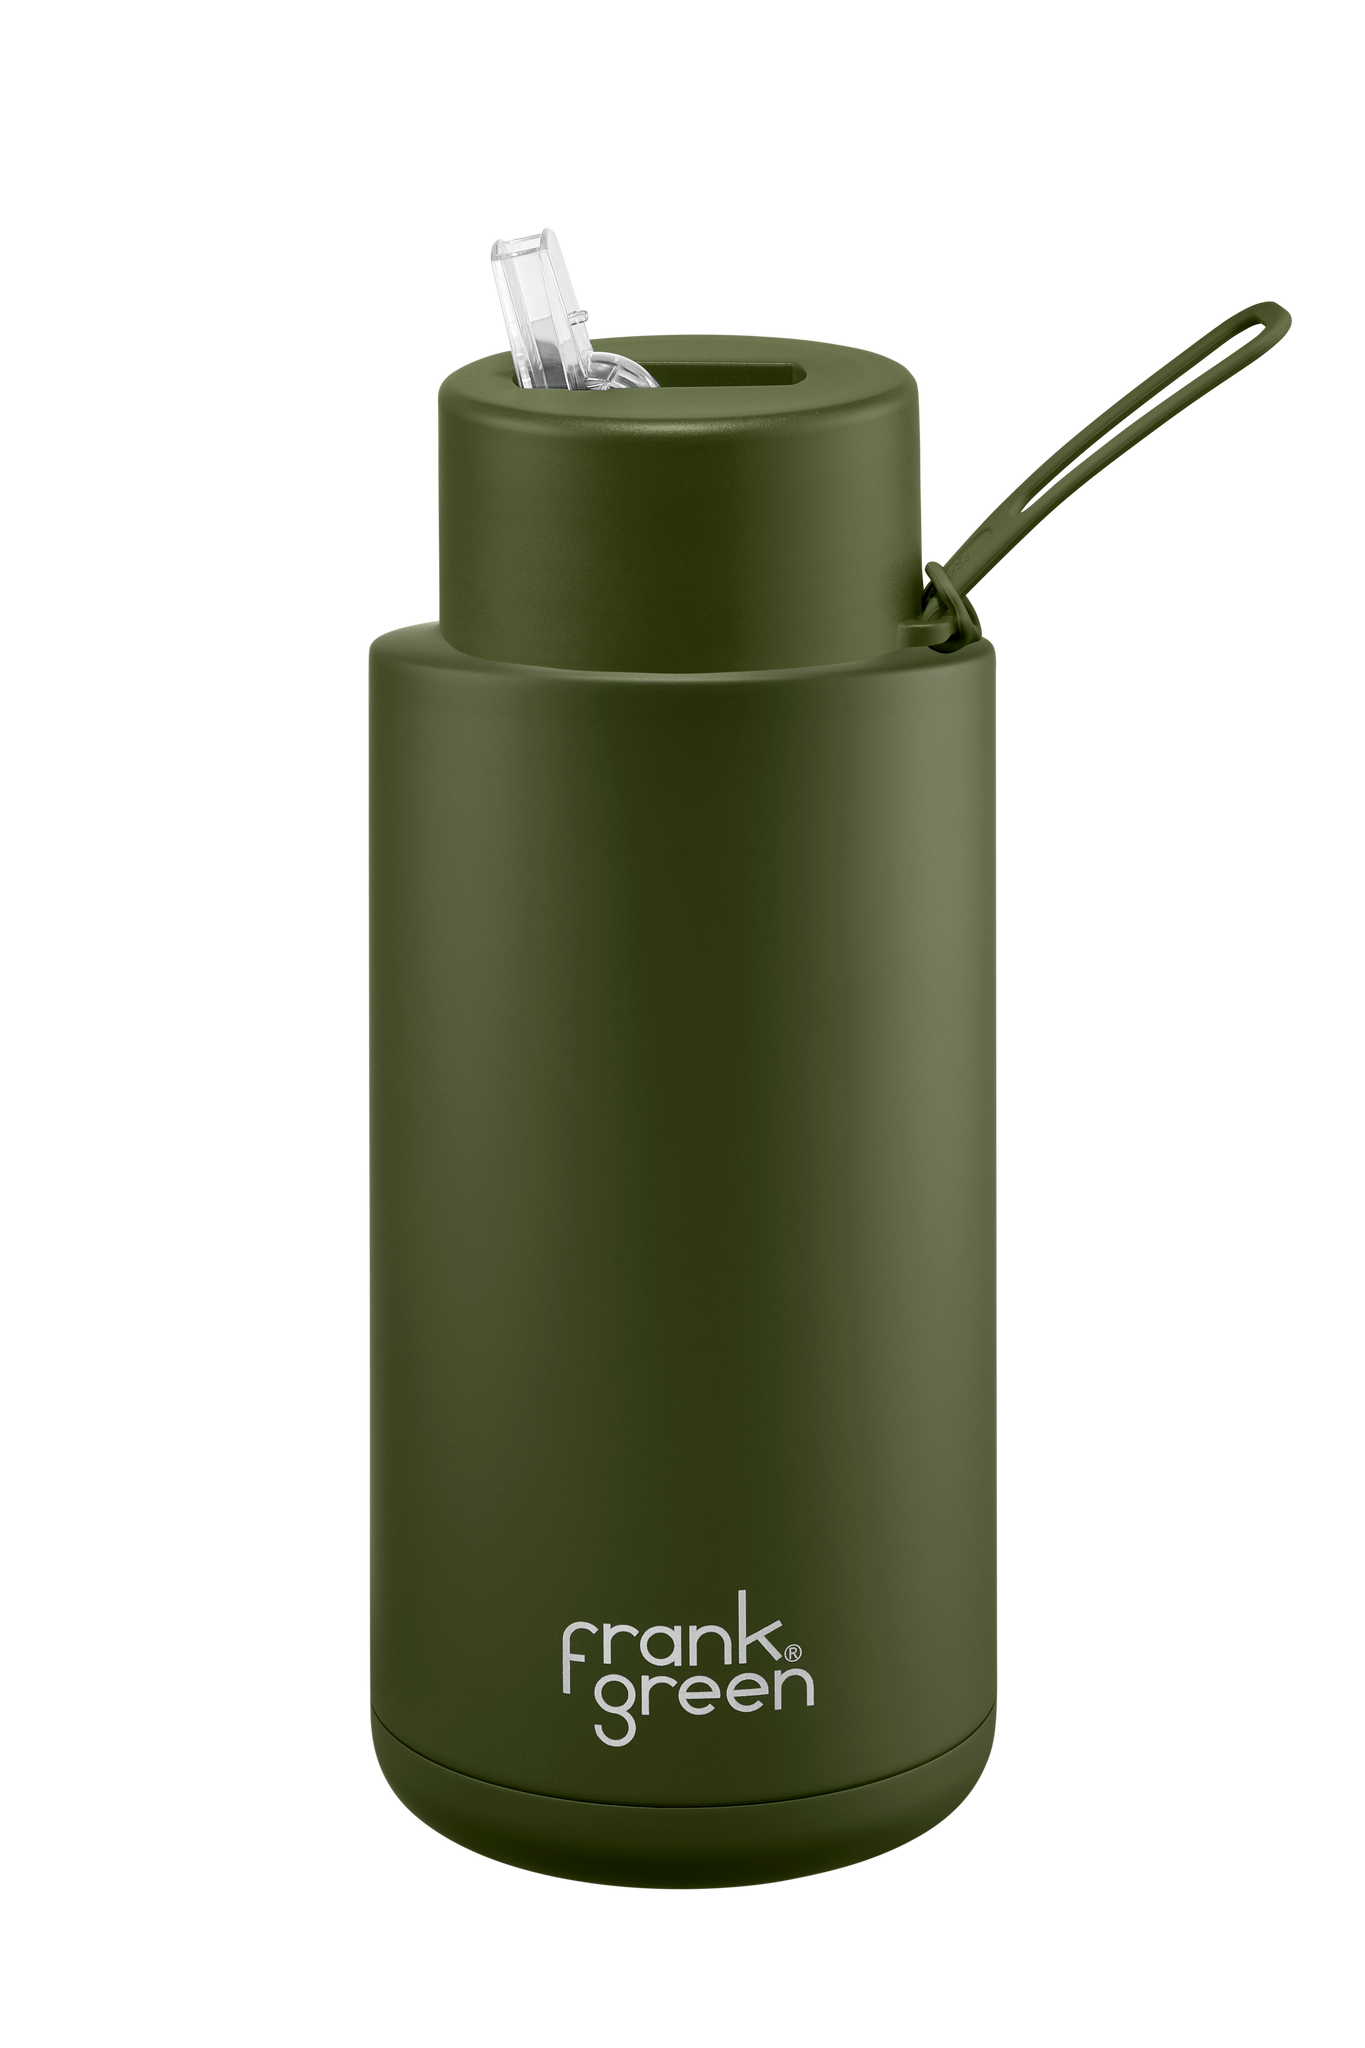 frank green 1L Ceramic Reusable Bottle with Straw Lid - ACCESSORIES